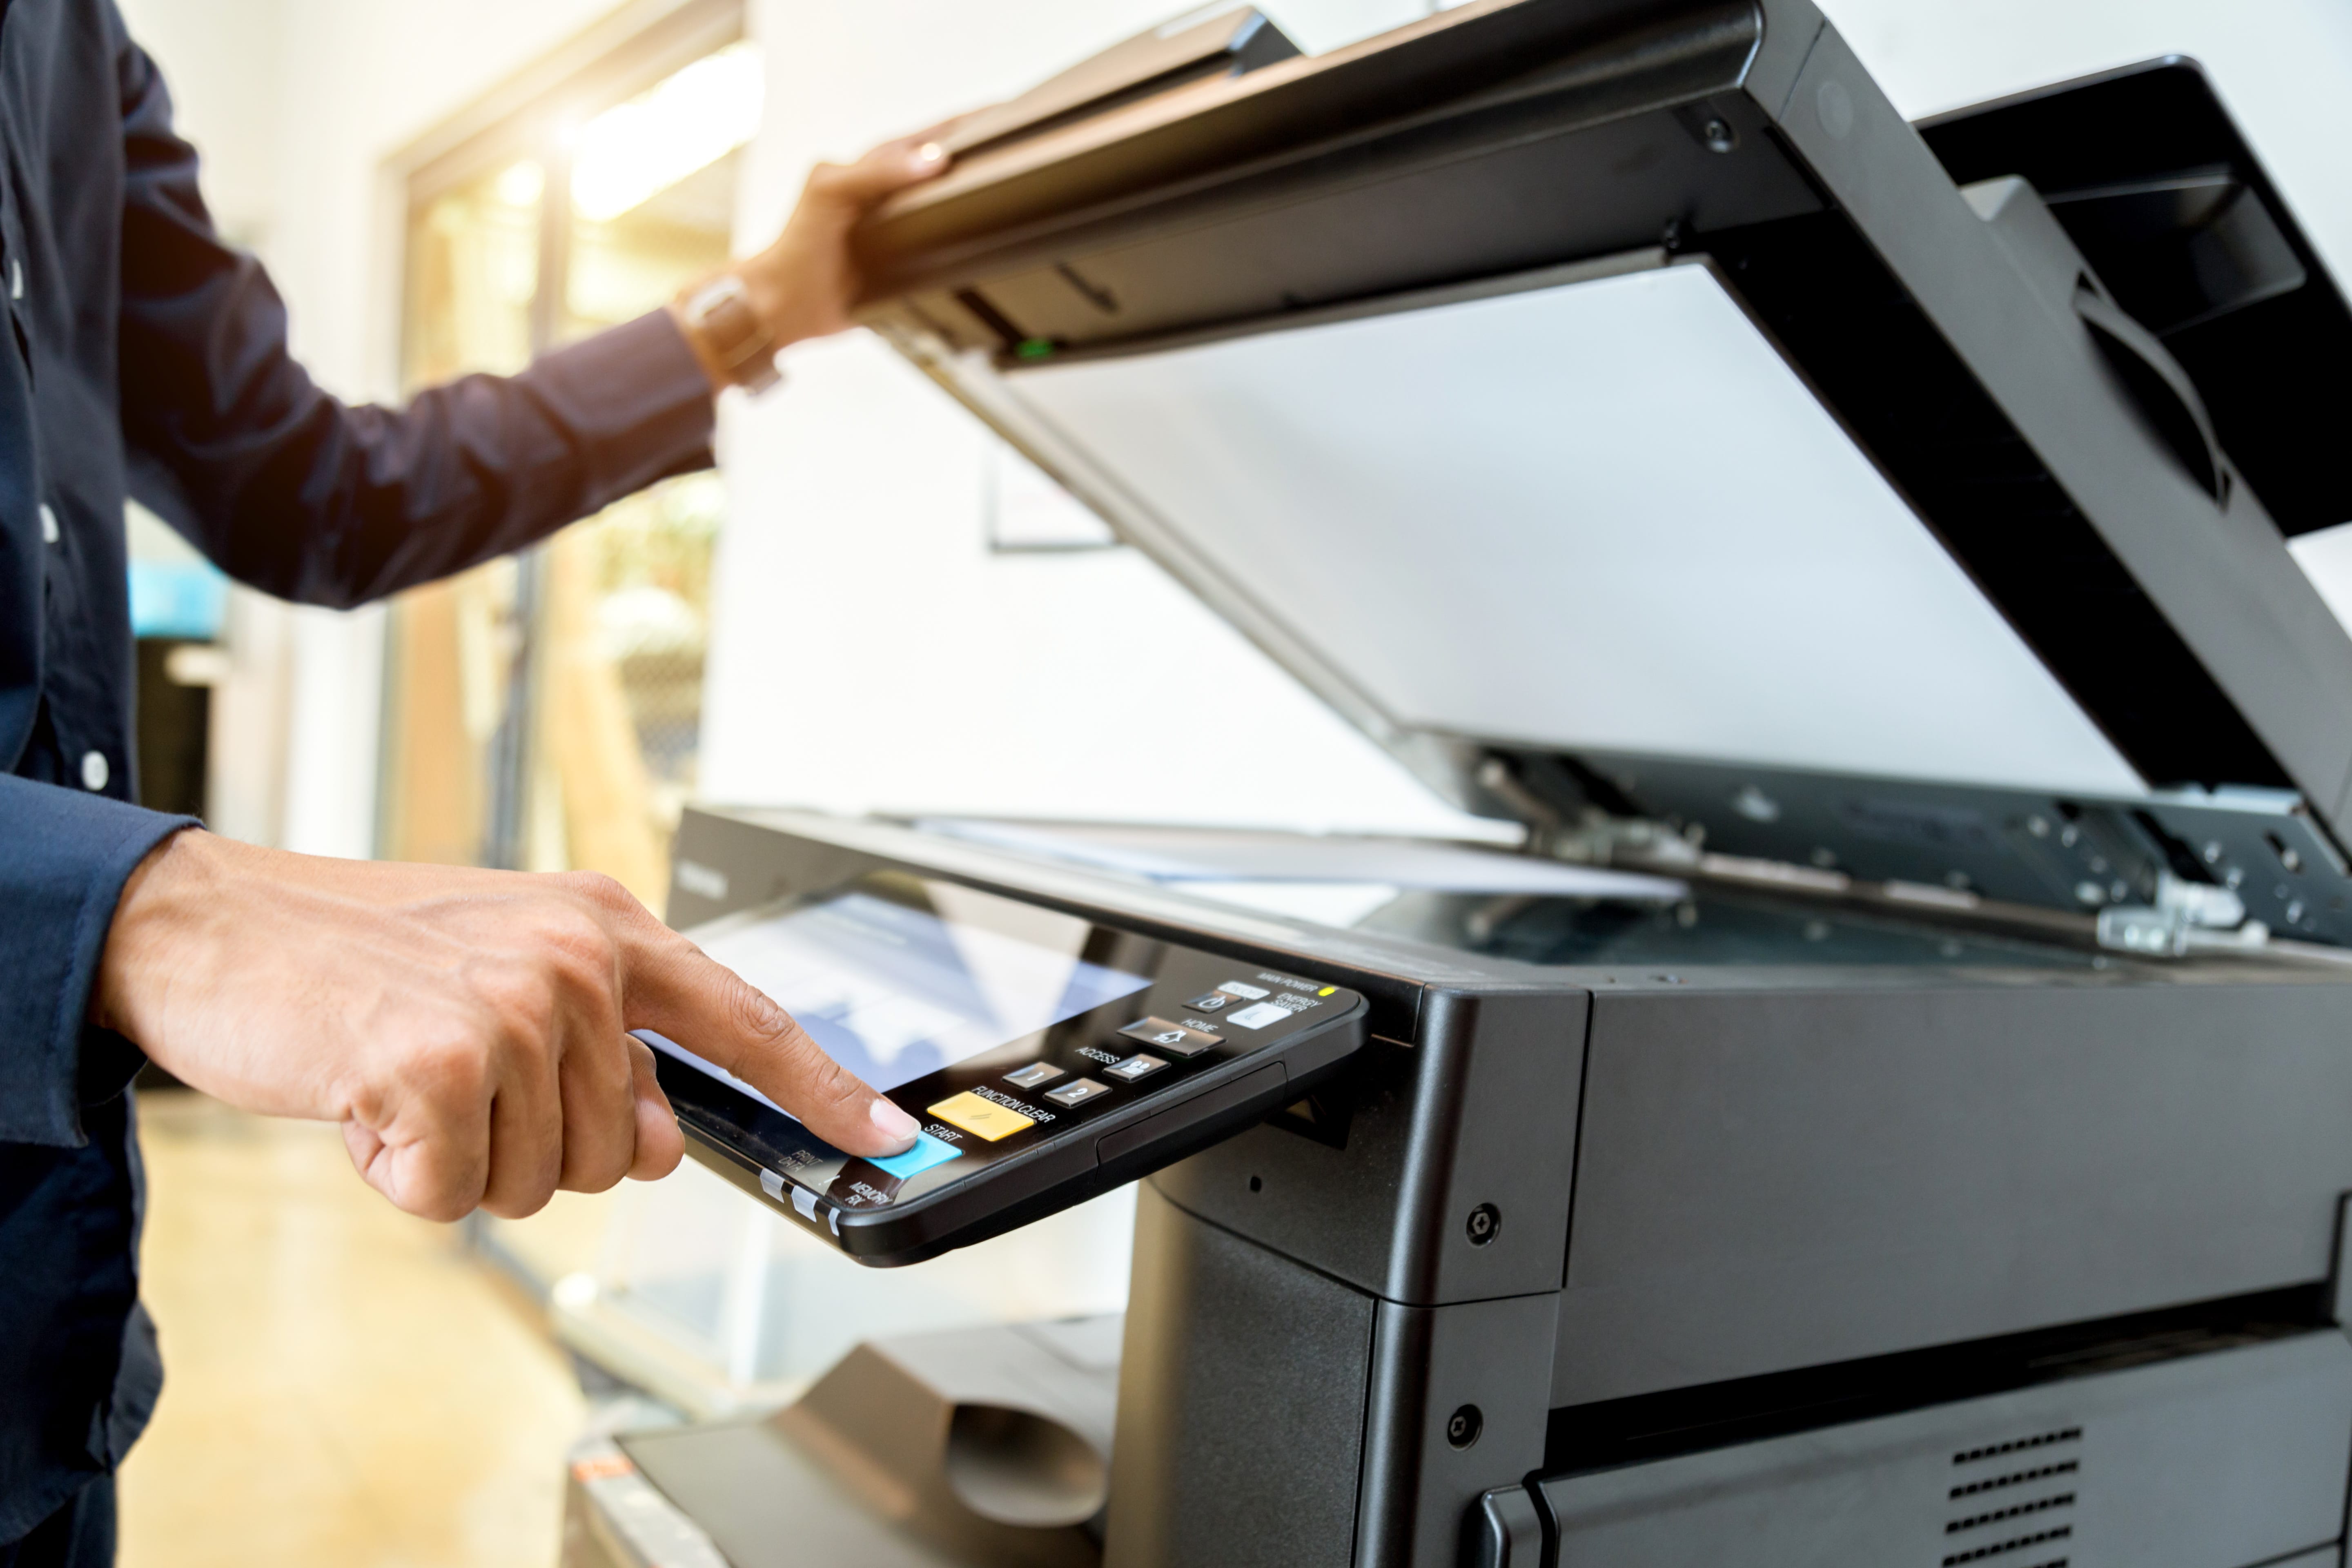 Are Printers and Copiers Stealing Your Information? - SEM Shred